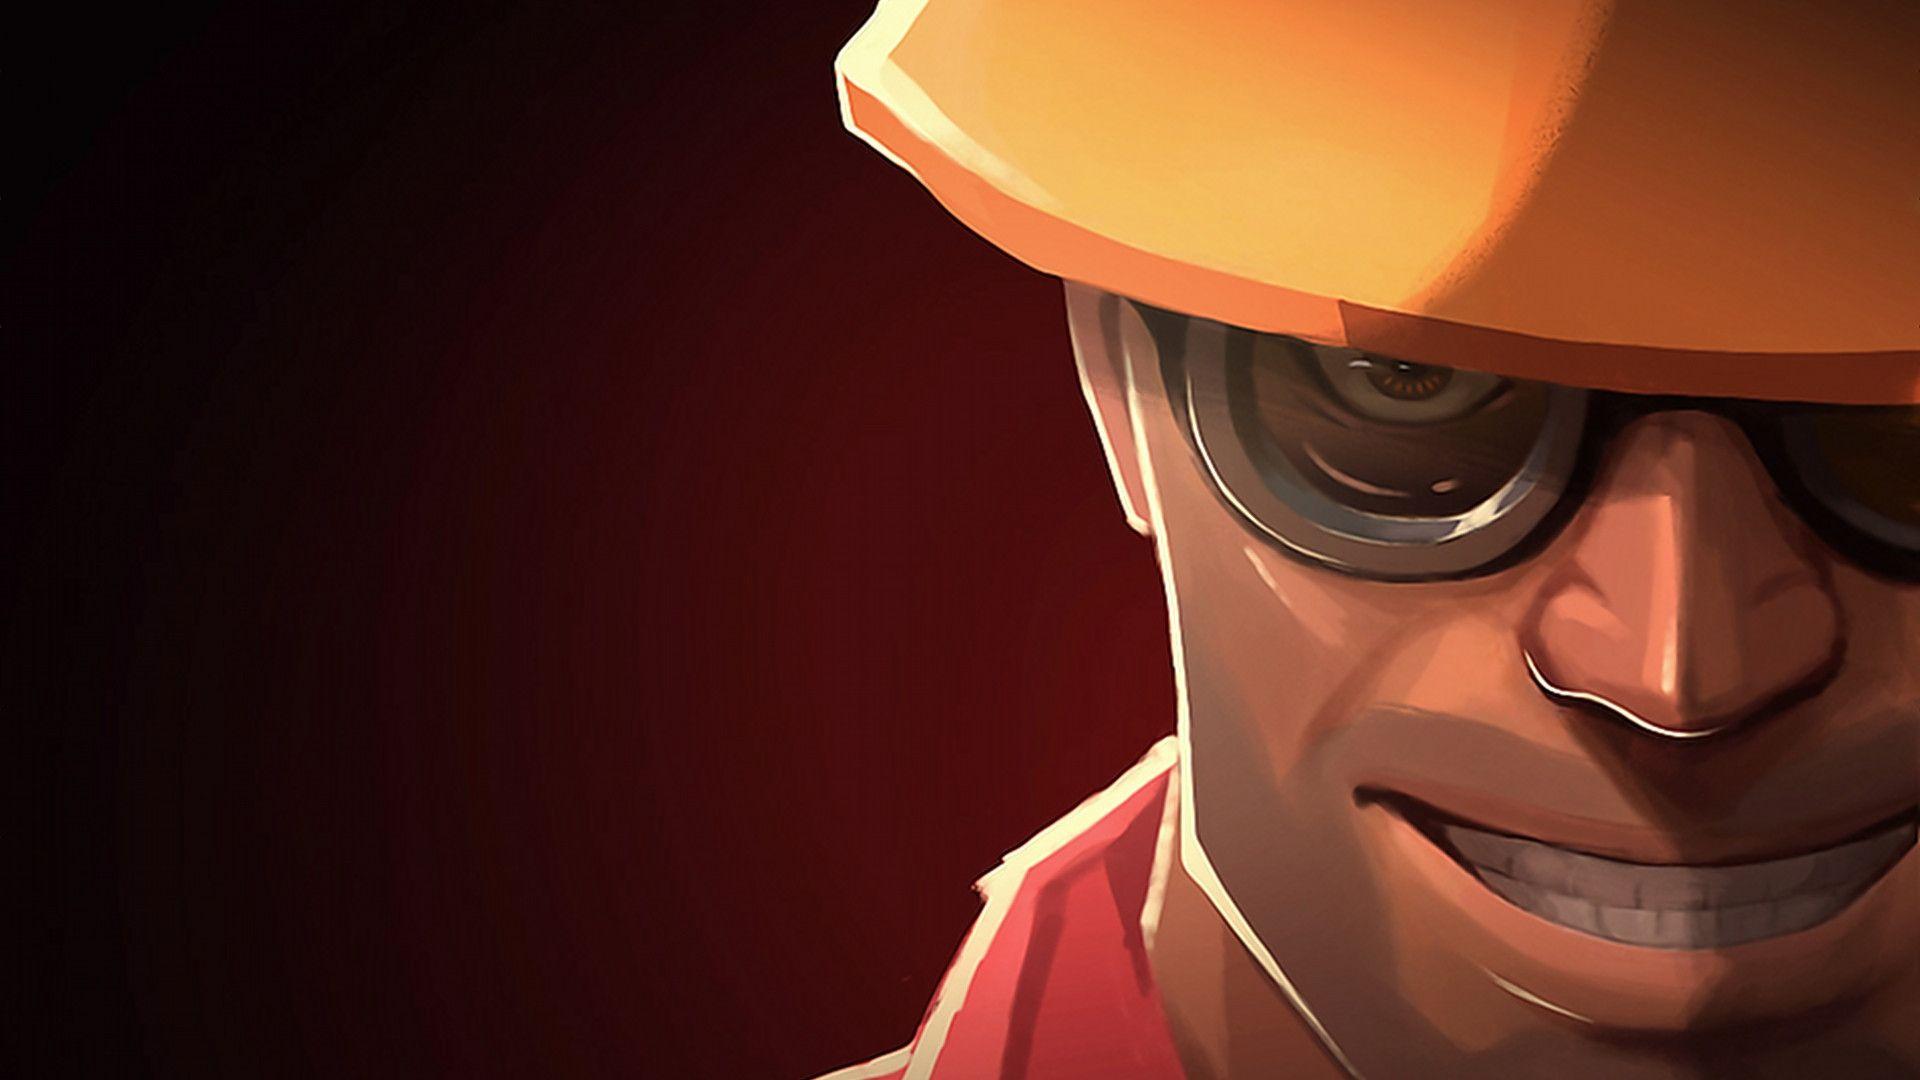 Team Fortress 2 Wallpaper. Team Fortress 2 Background